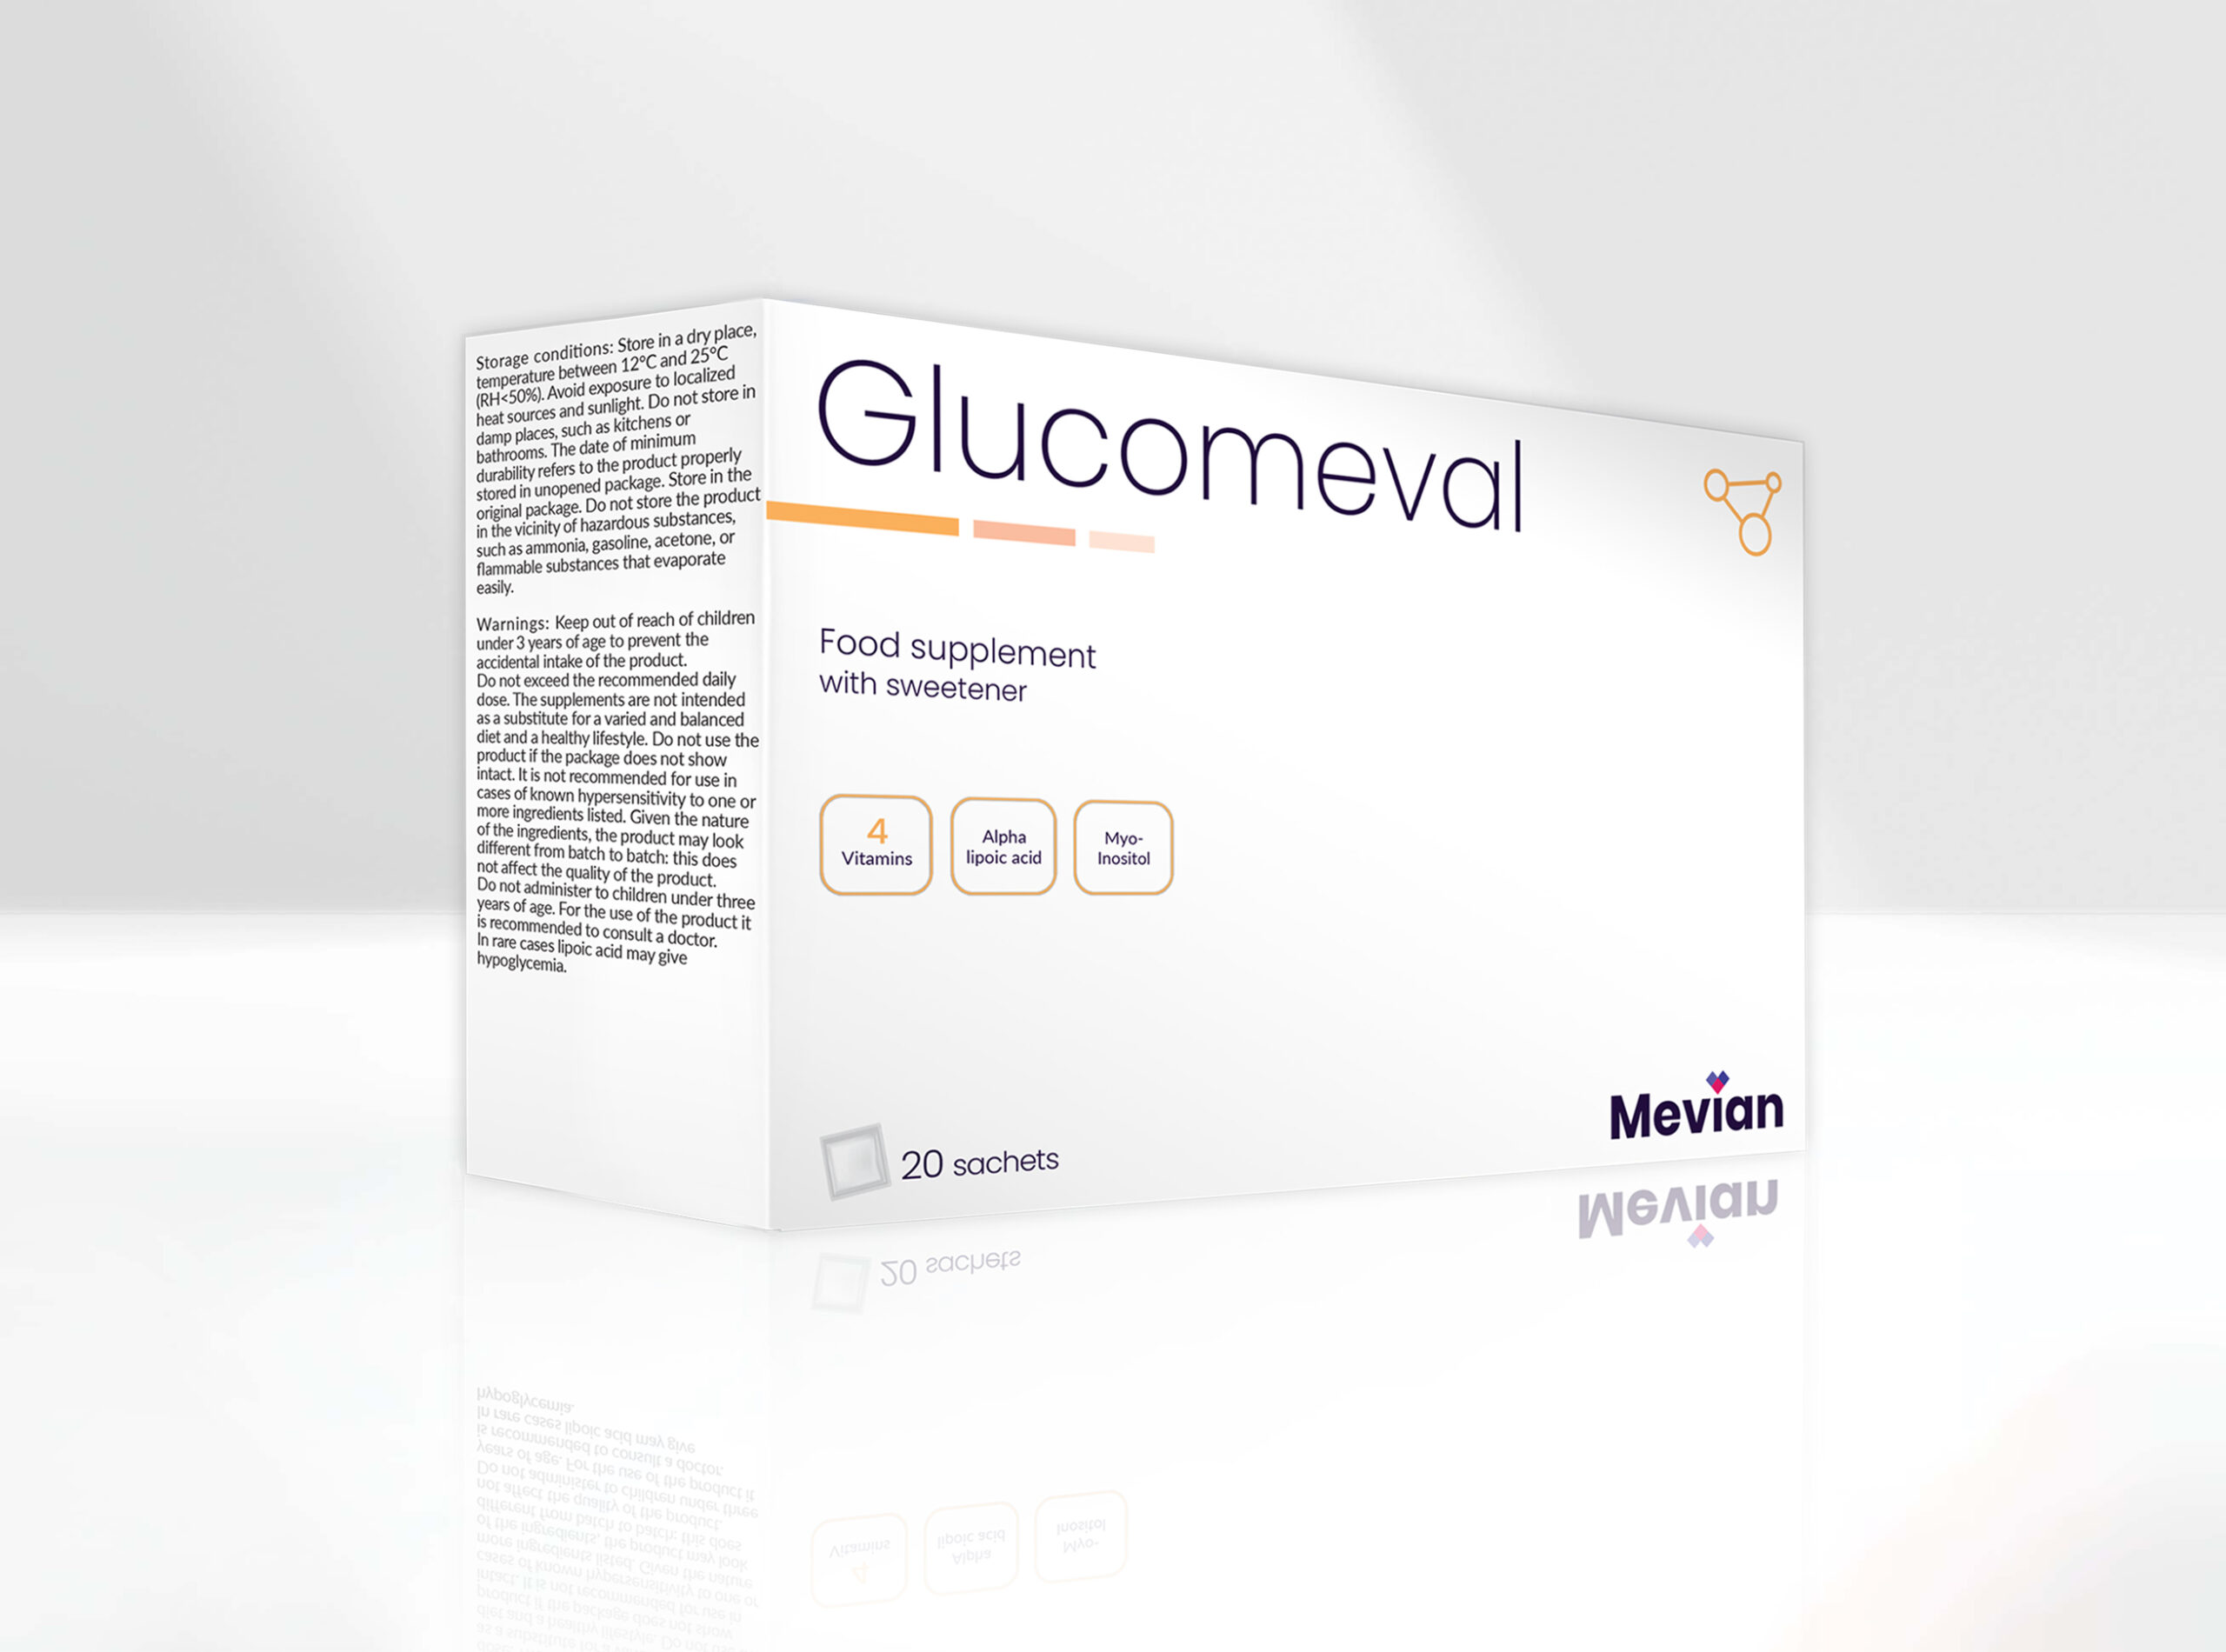 Glucomeval in an ideal product that supports macronutrient metabolism and maintenance of normal blood glucose levels, regulation of hormonal activity, and reduction of tiredness and fatigue.